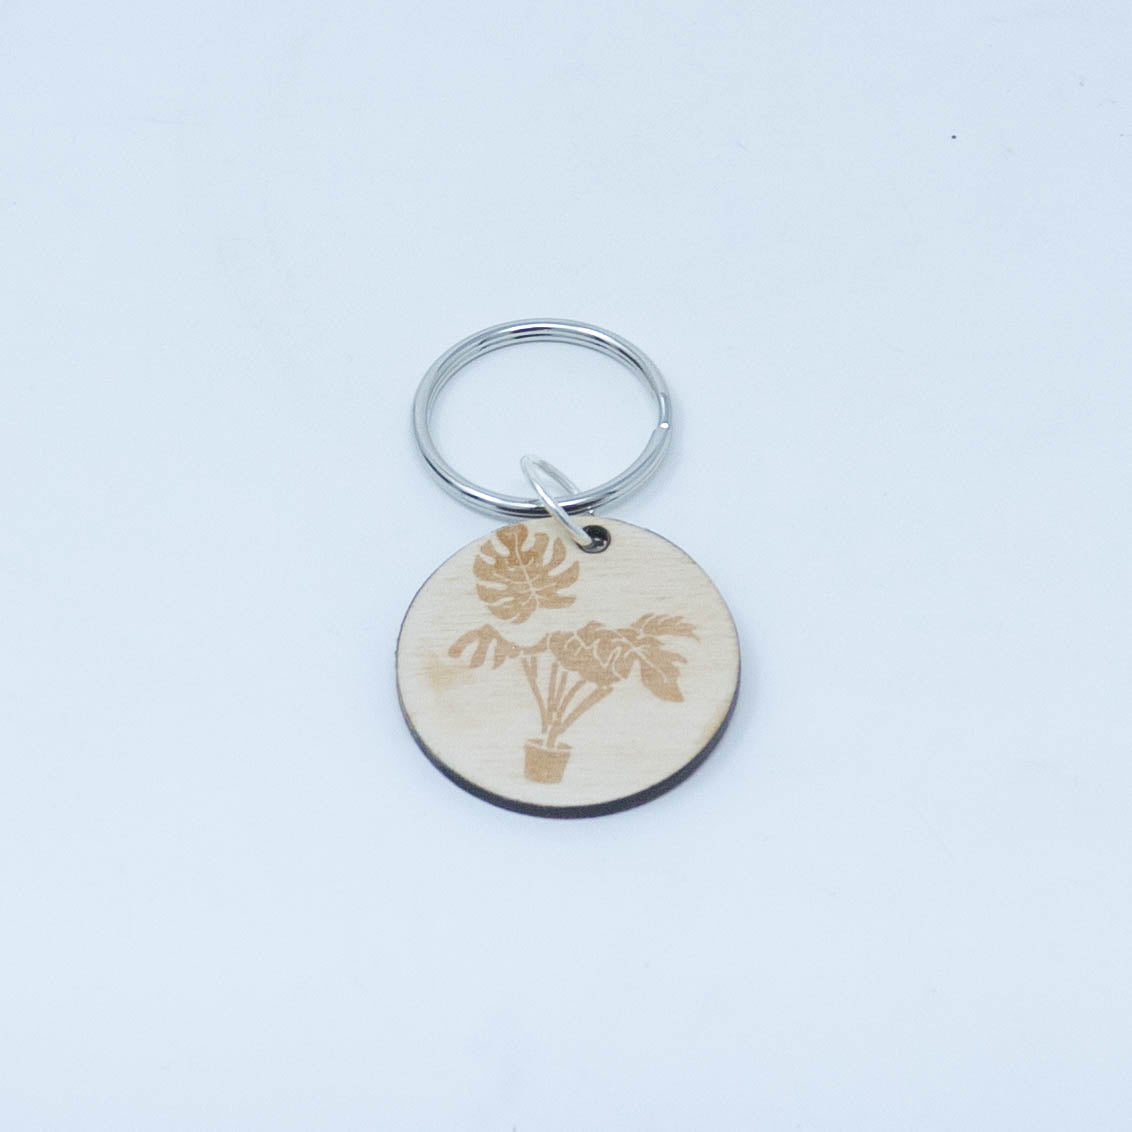 Laser-engraved Key Chain/Fob